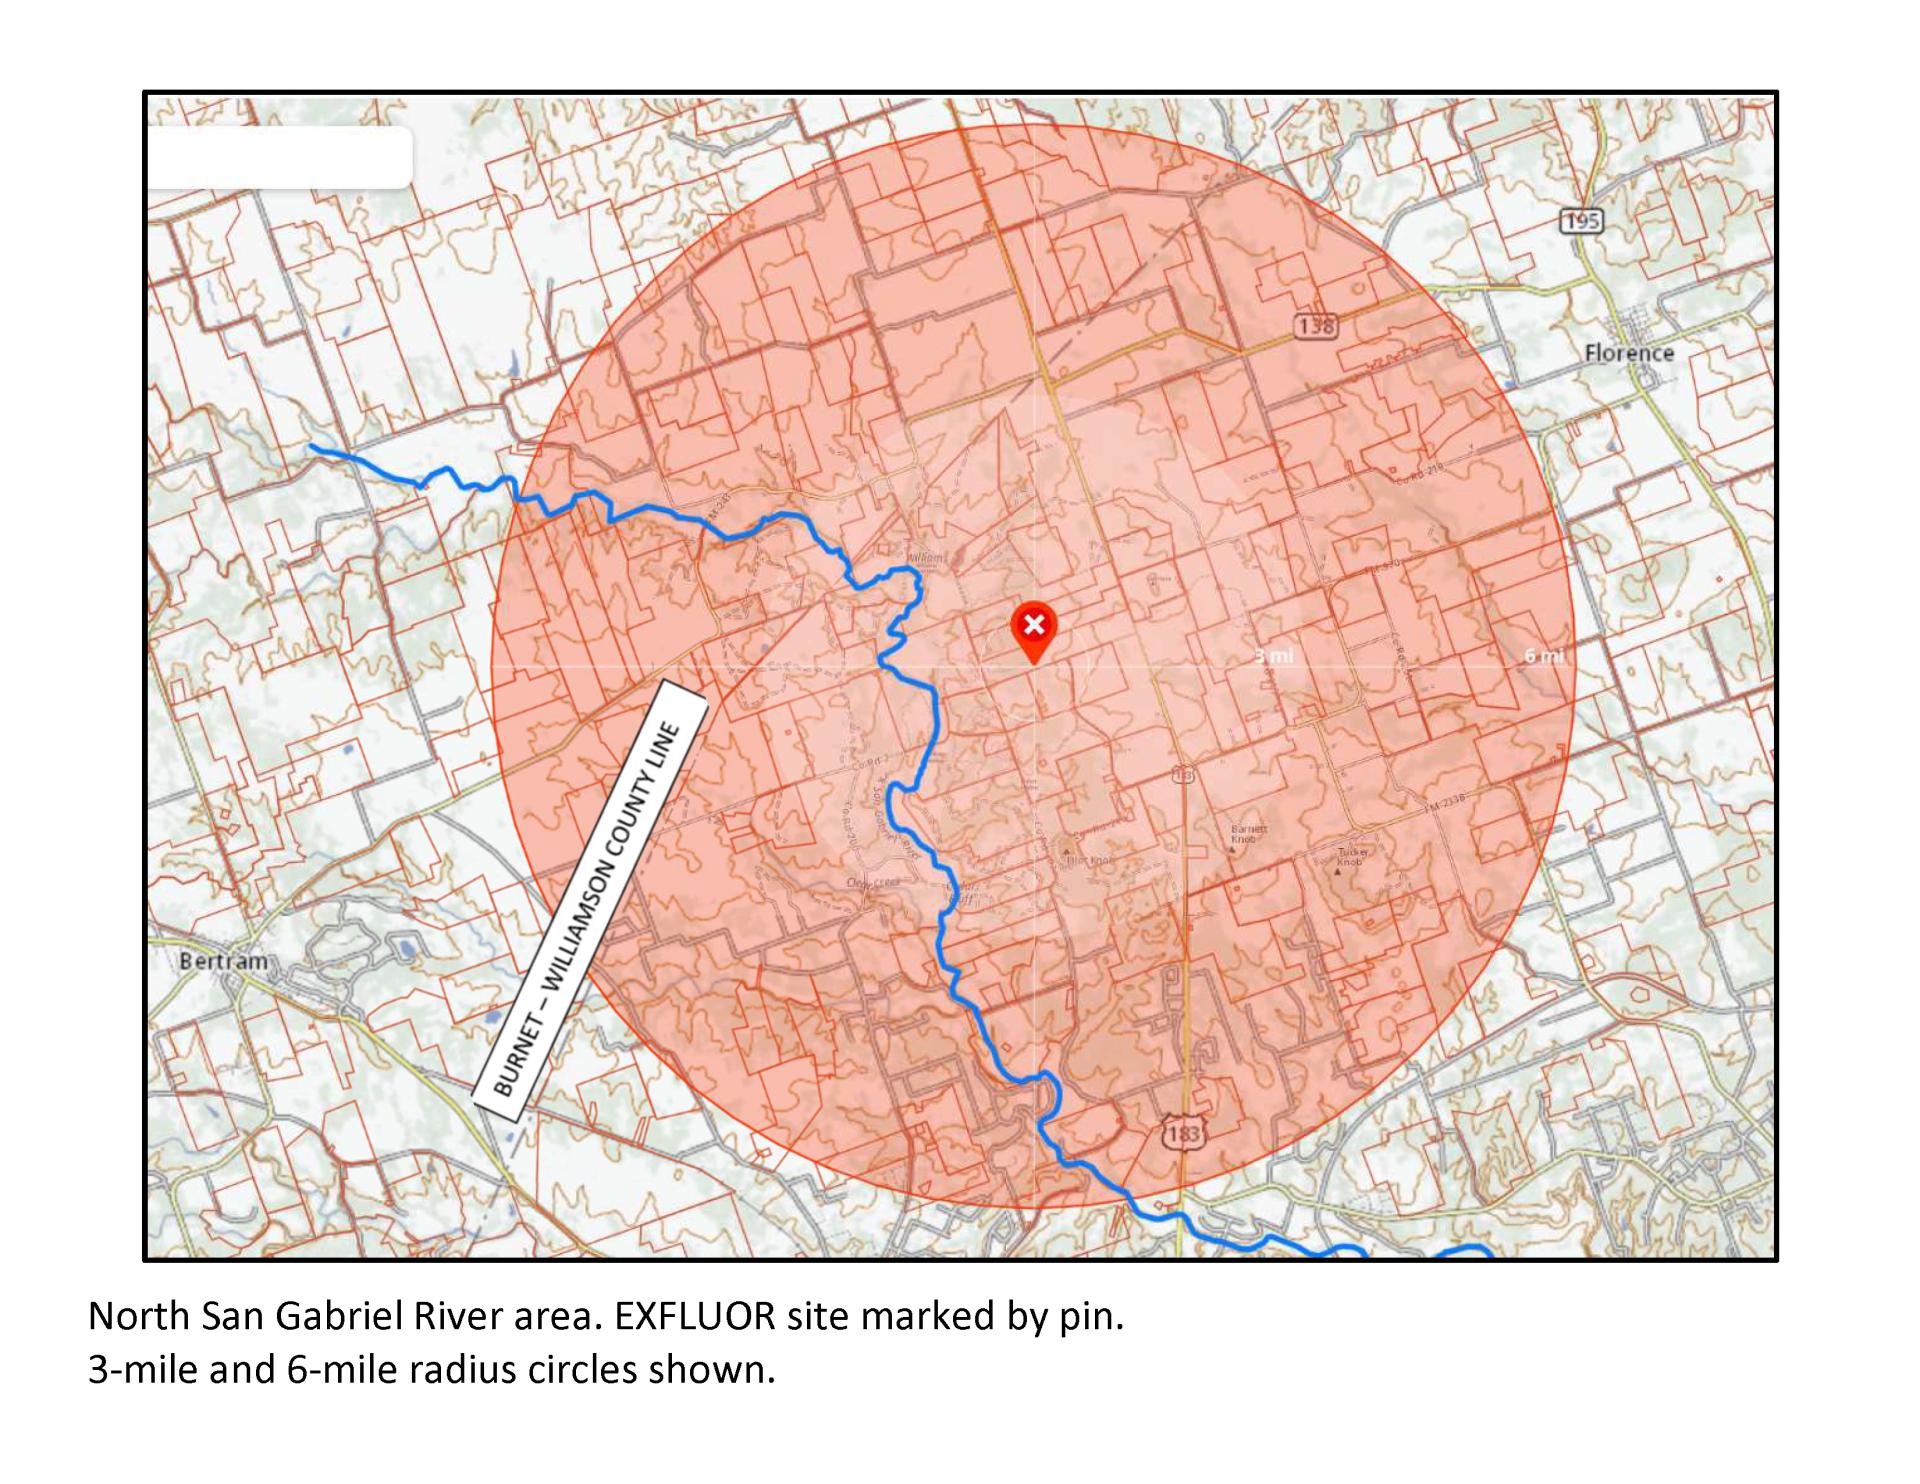 North San Gabriel River area. EXFLUOR site marked by pin. 3-mile and 6-mile radius circles shown.